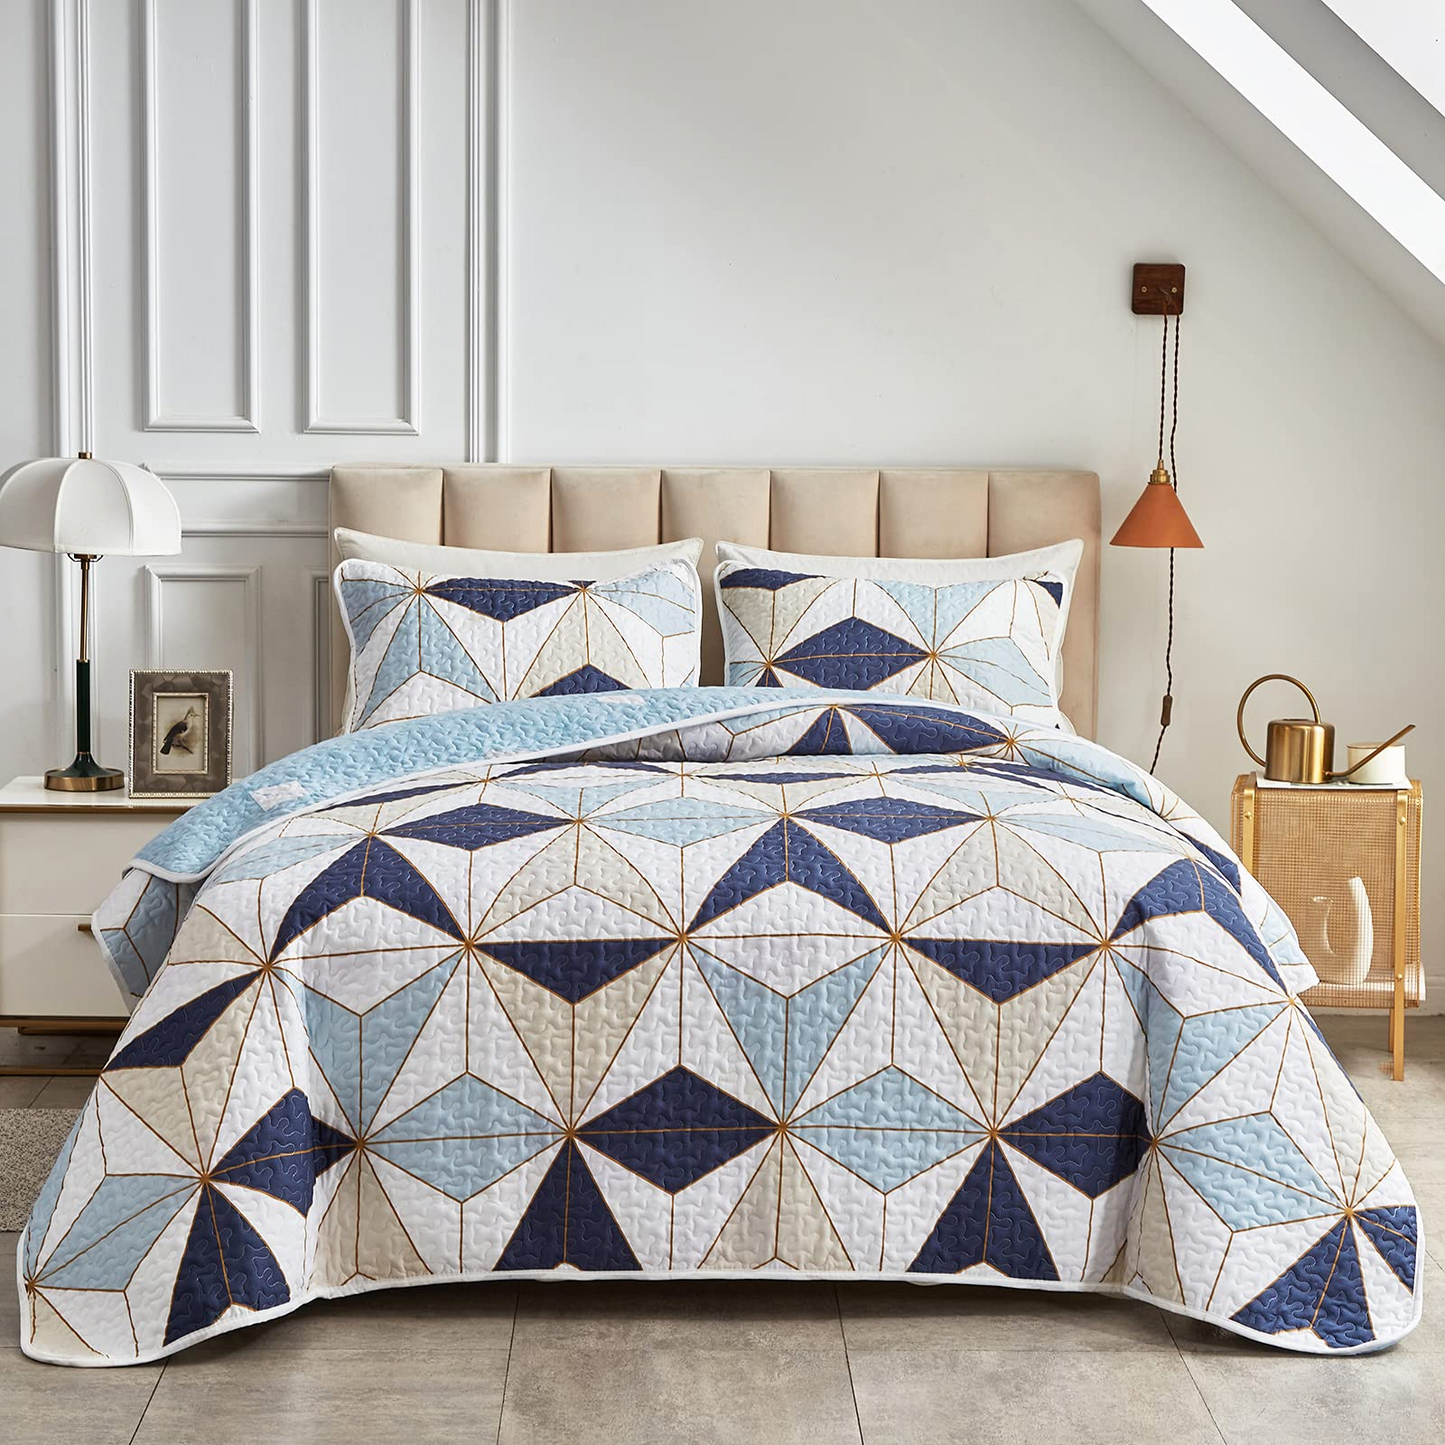 Blue Geometric Pattern Duvet Cover 4 Pieces Set With 2 Pillowcases